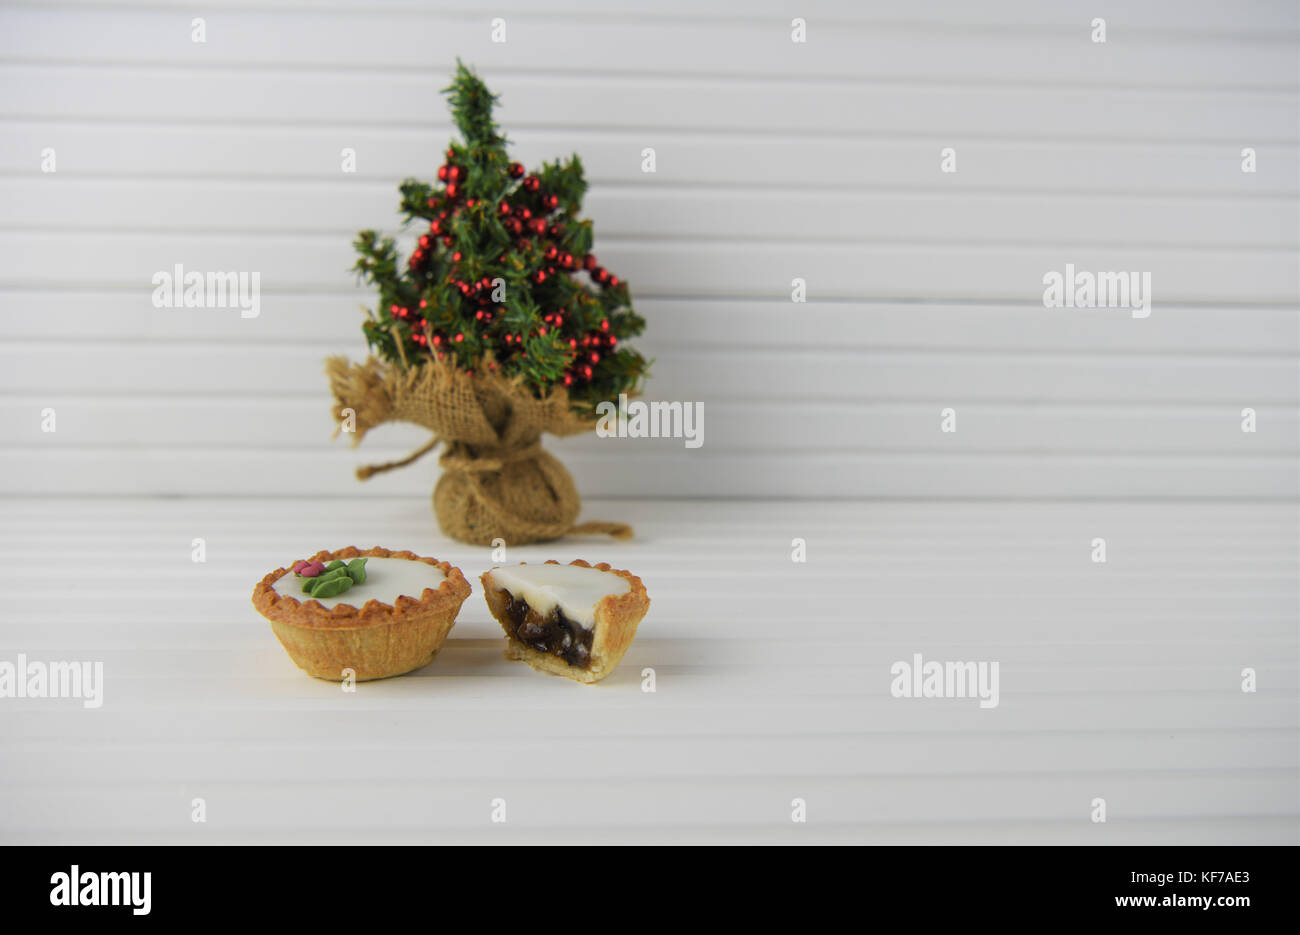 tasty Christmas food photography image of iced mince pies pie and ornament green xmas tree and beads with bright white wood background Stock Photo